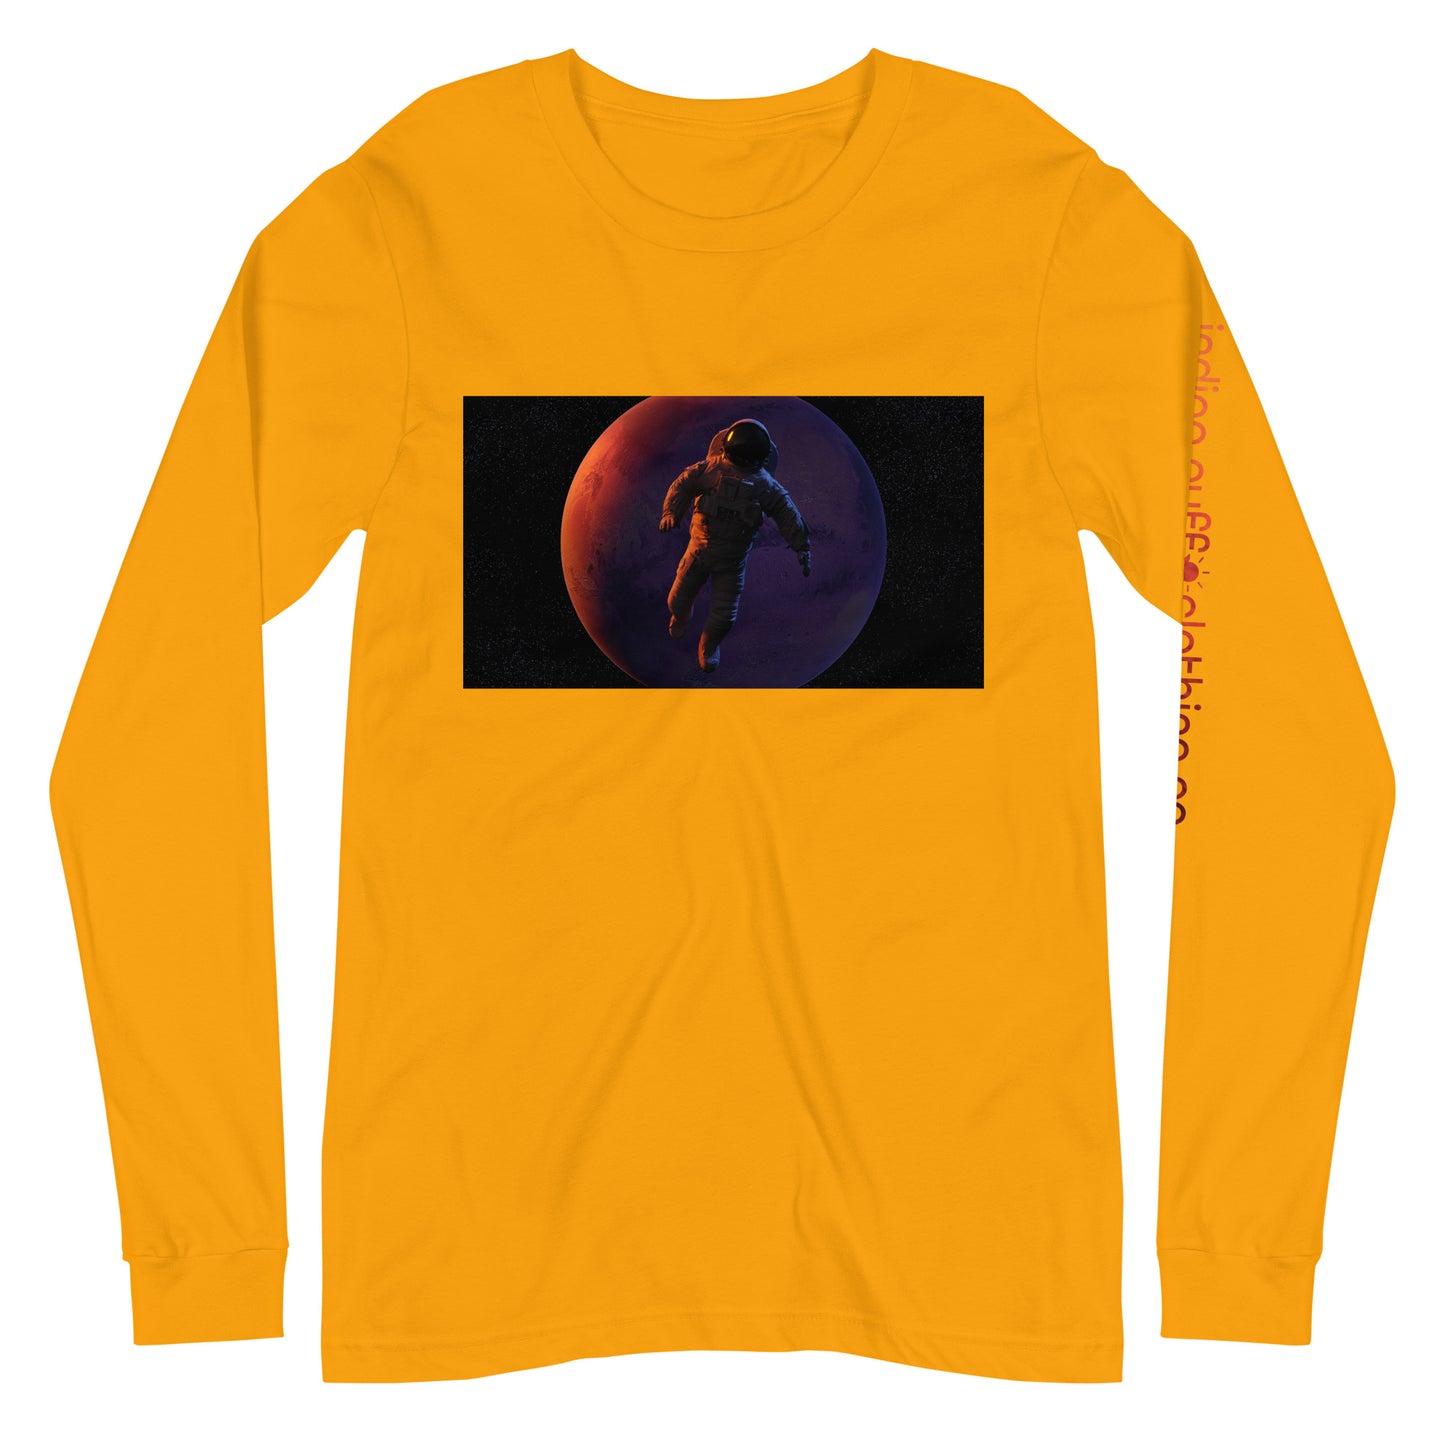 Spaced Out Long Sleeve Tee (white)